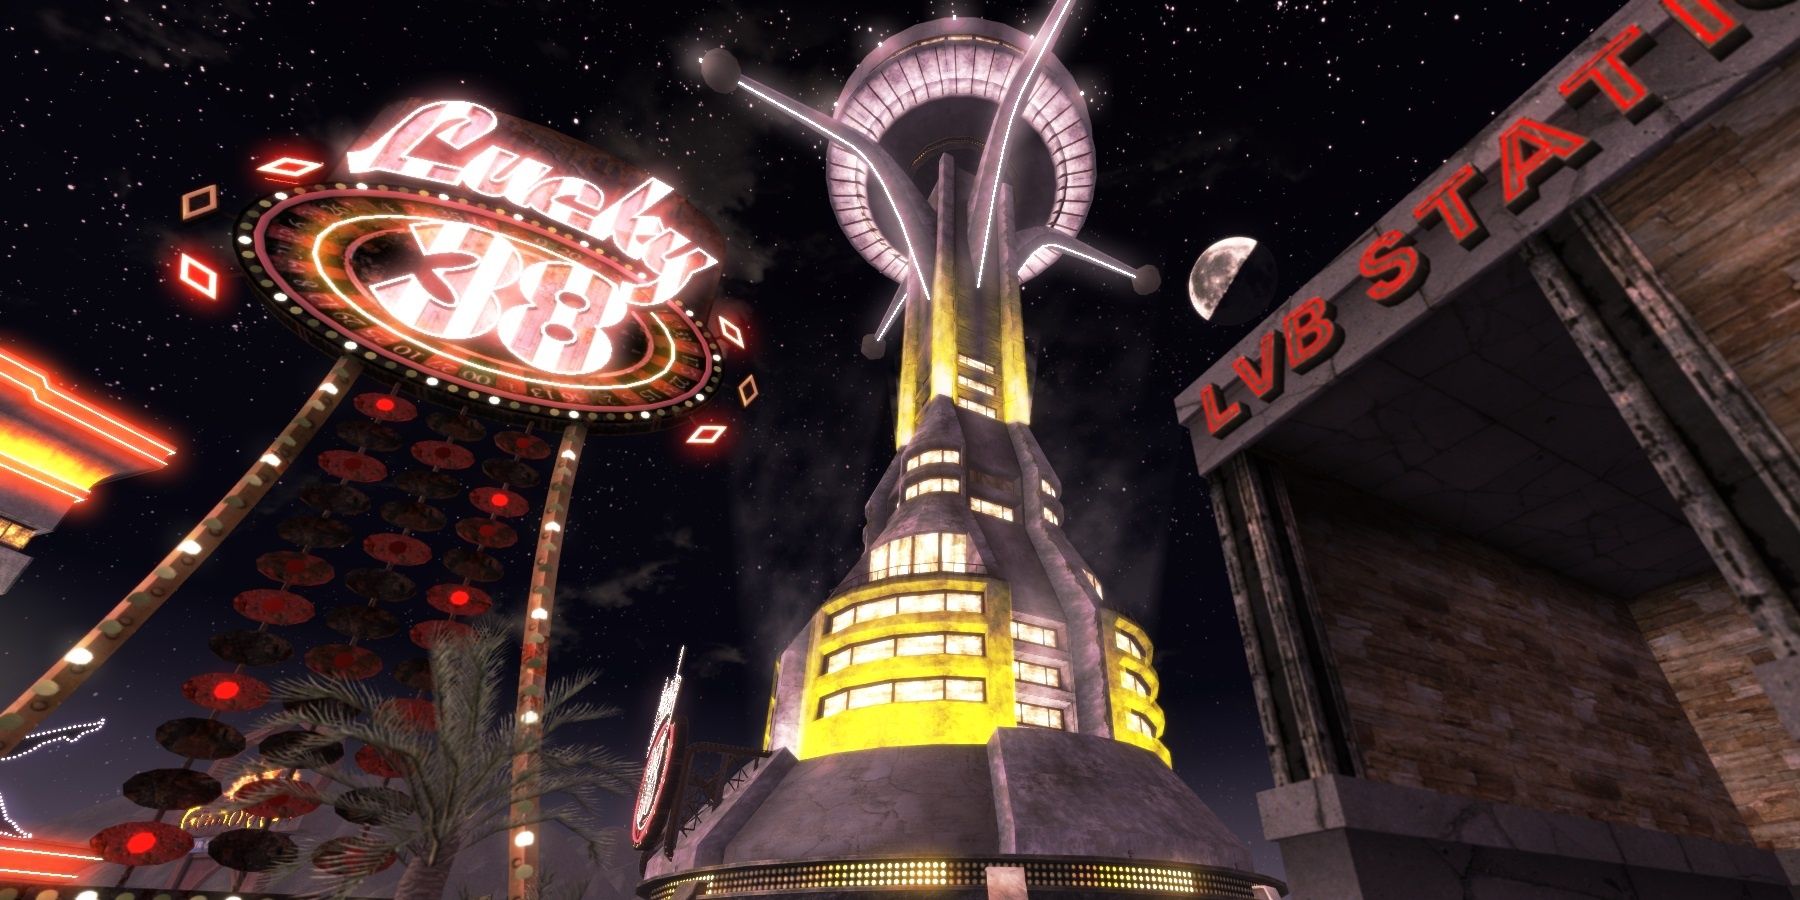 The Lucky 38 Casino from Fallout: New Vegas at night